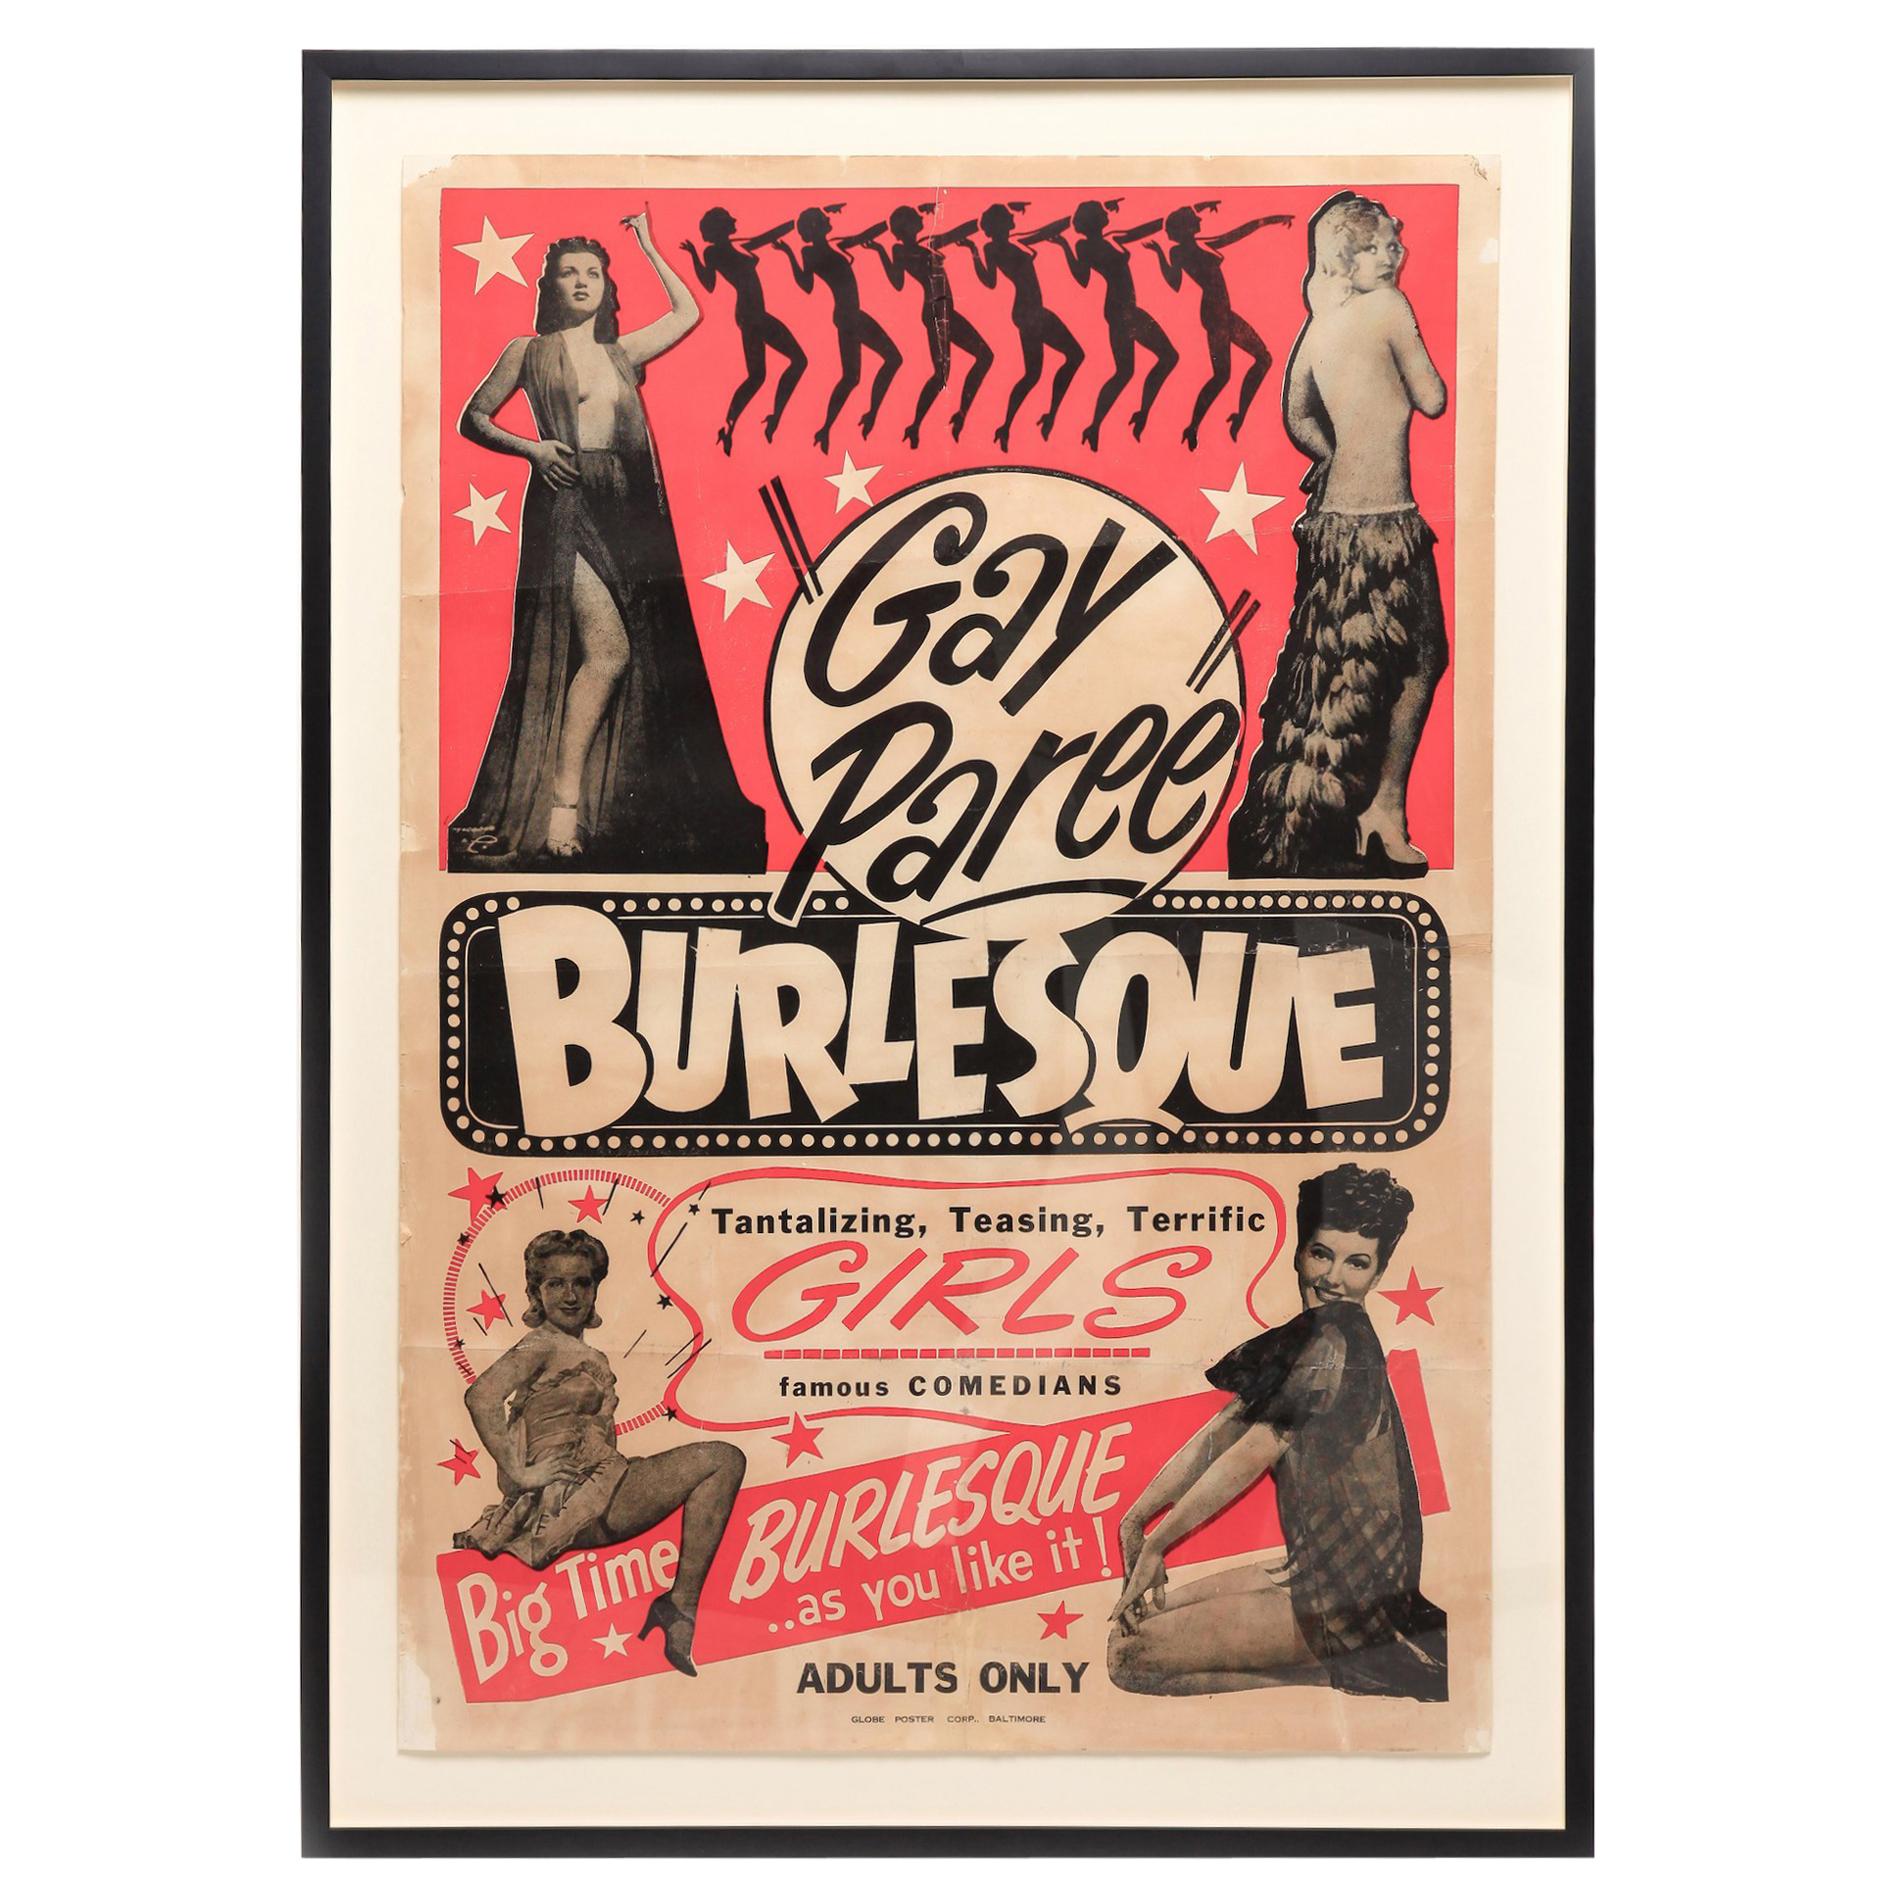 Vintage 1940s "Gay Paree" Burlesque Poster